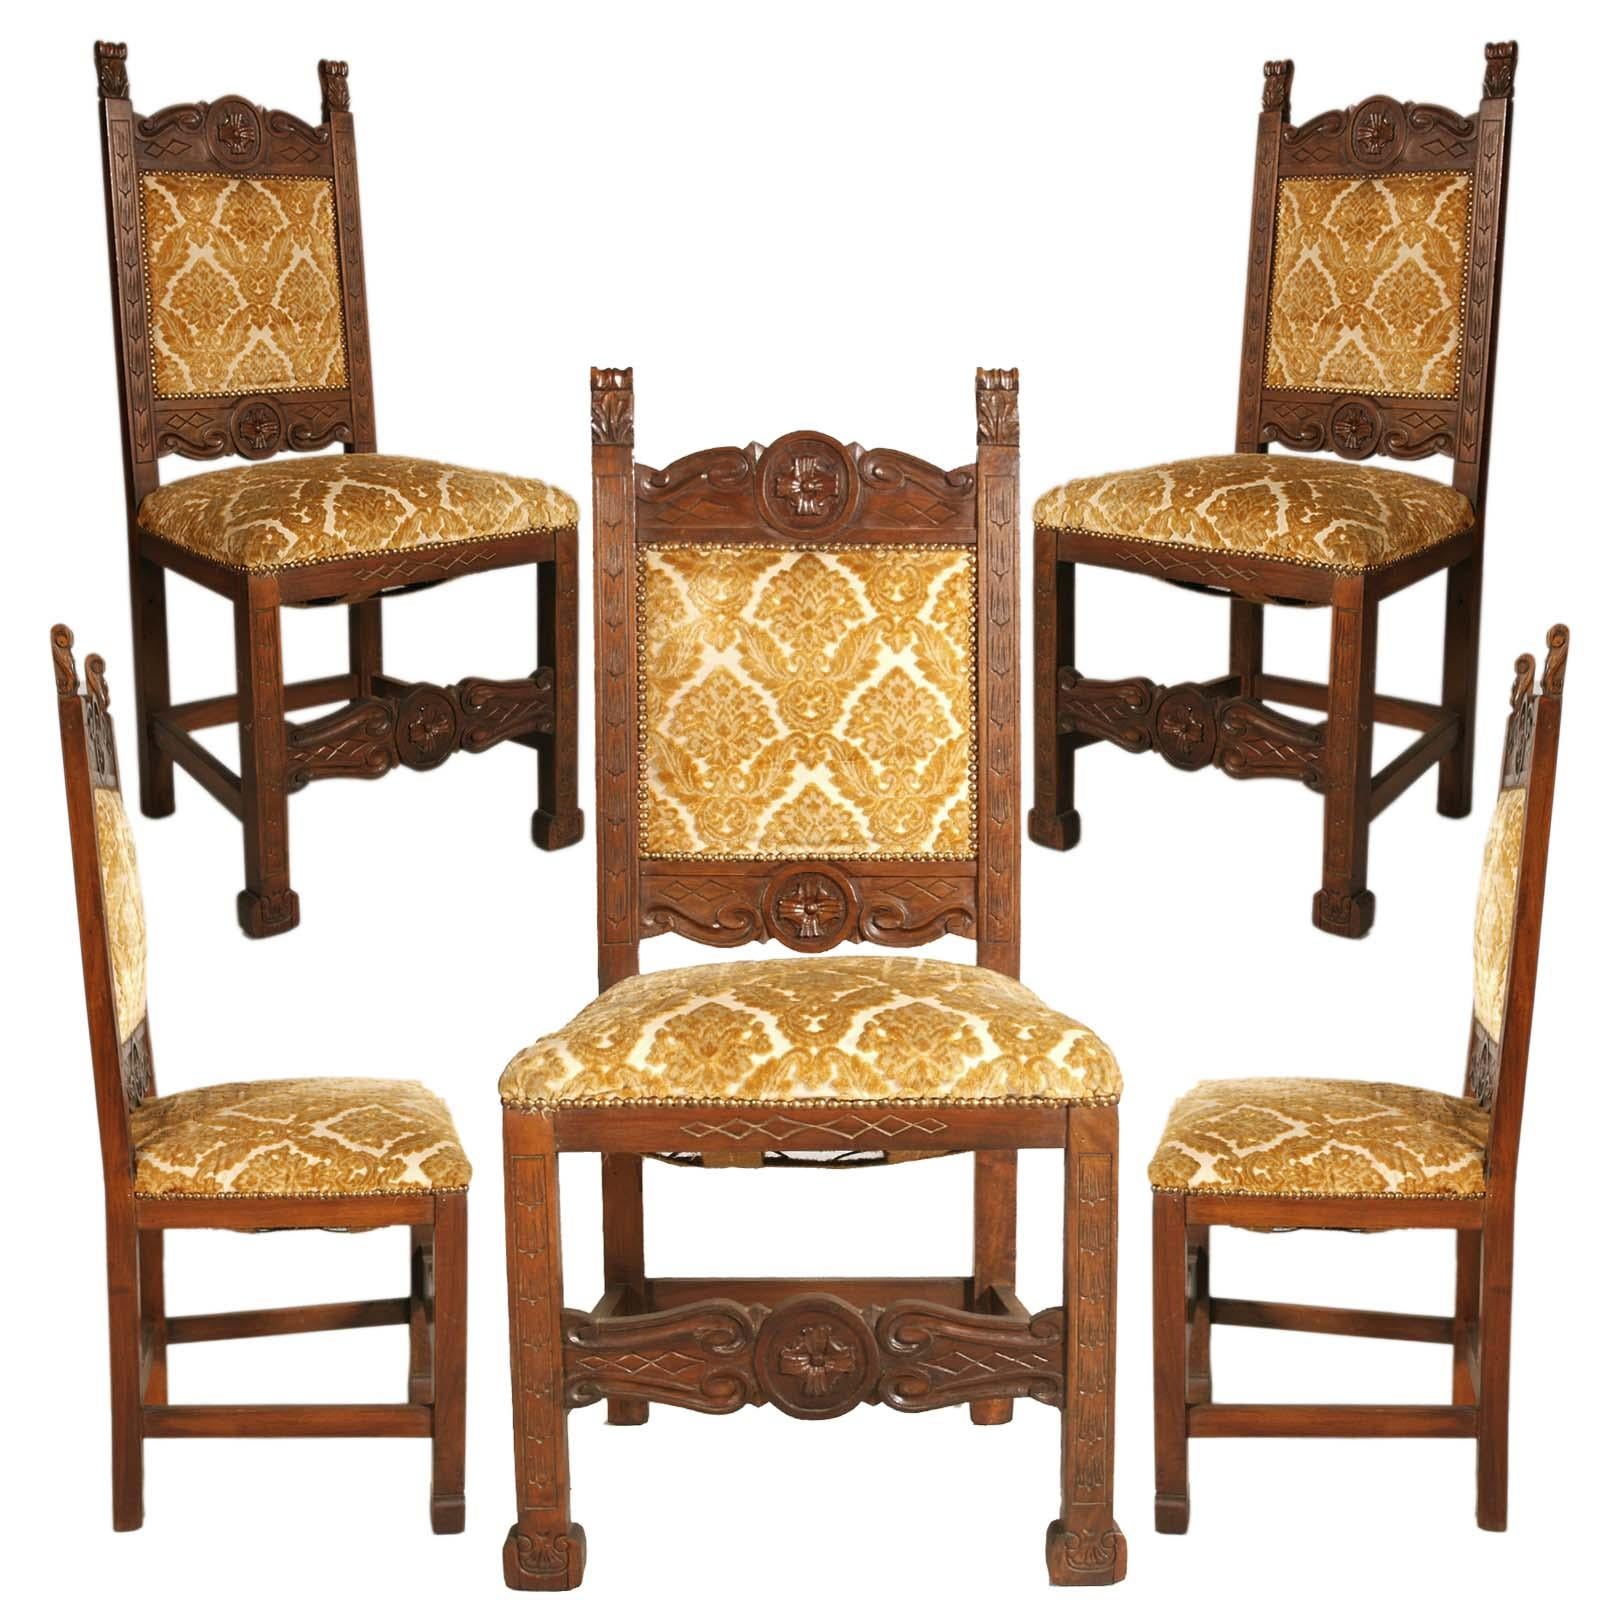 Italian Tuscany early 20th century six Renaissance chairs, in solid walnut, richly hand carved, Dini e Puccini attributed. Back and seat ocher velvet upholstered with original straps and springs of the era in good condition. 
Restored and wax